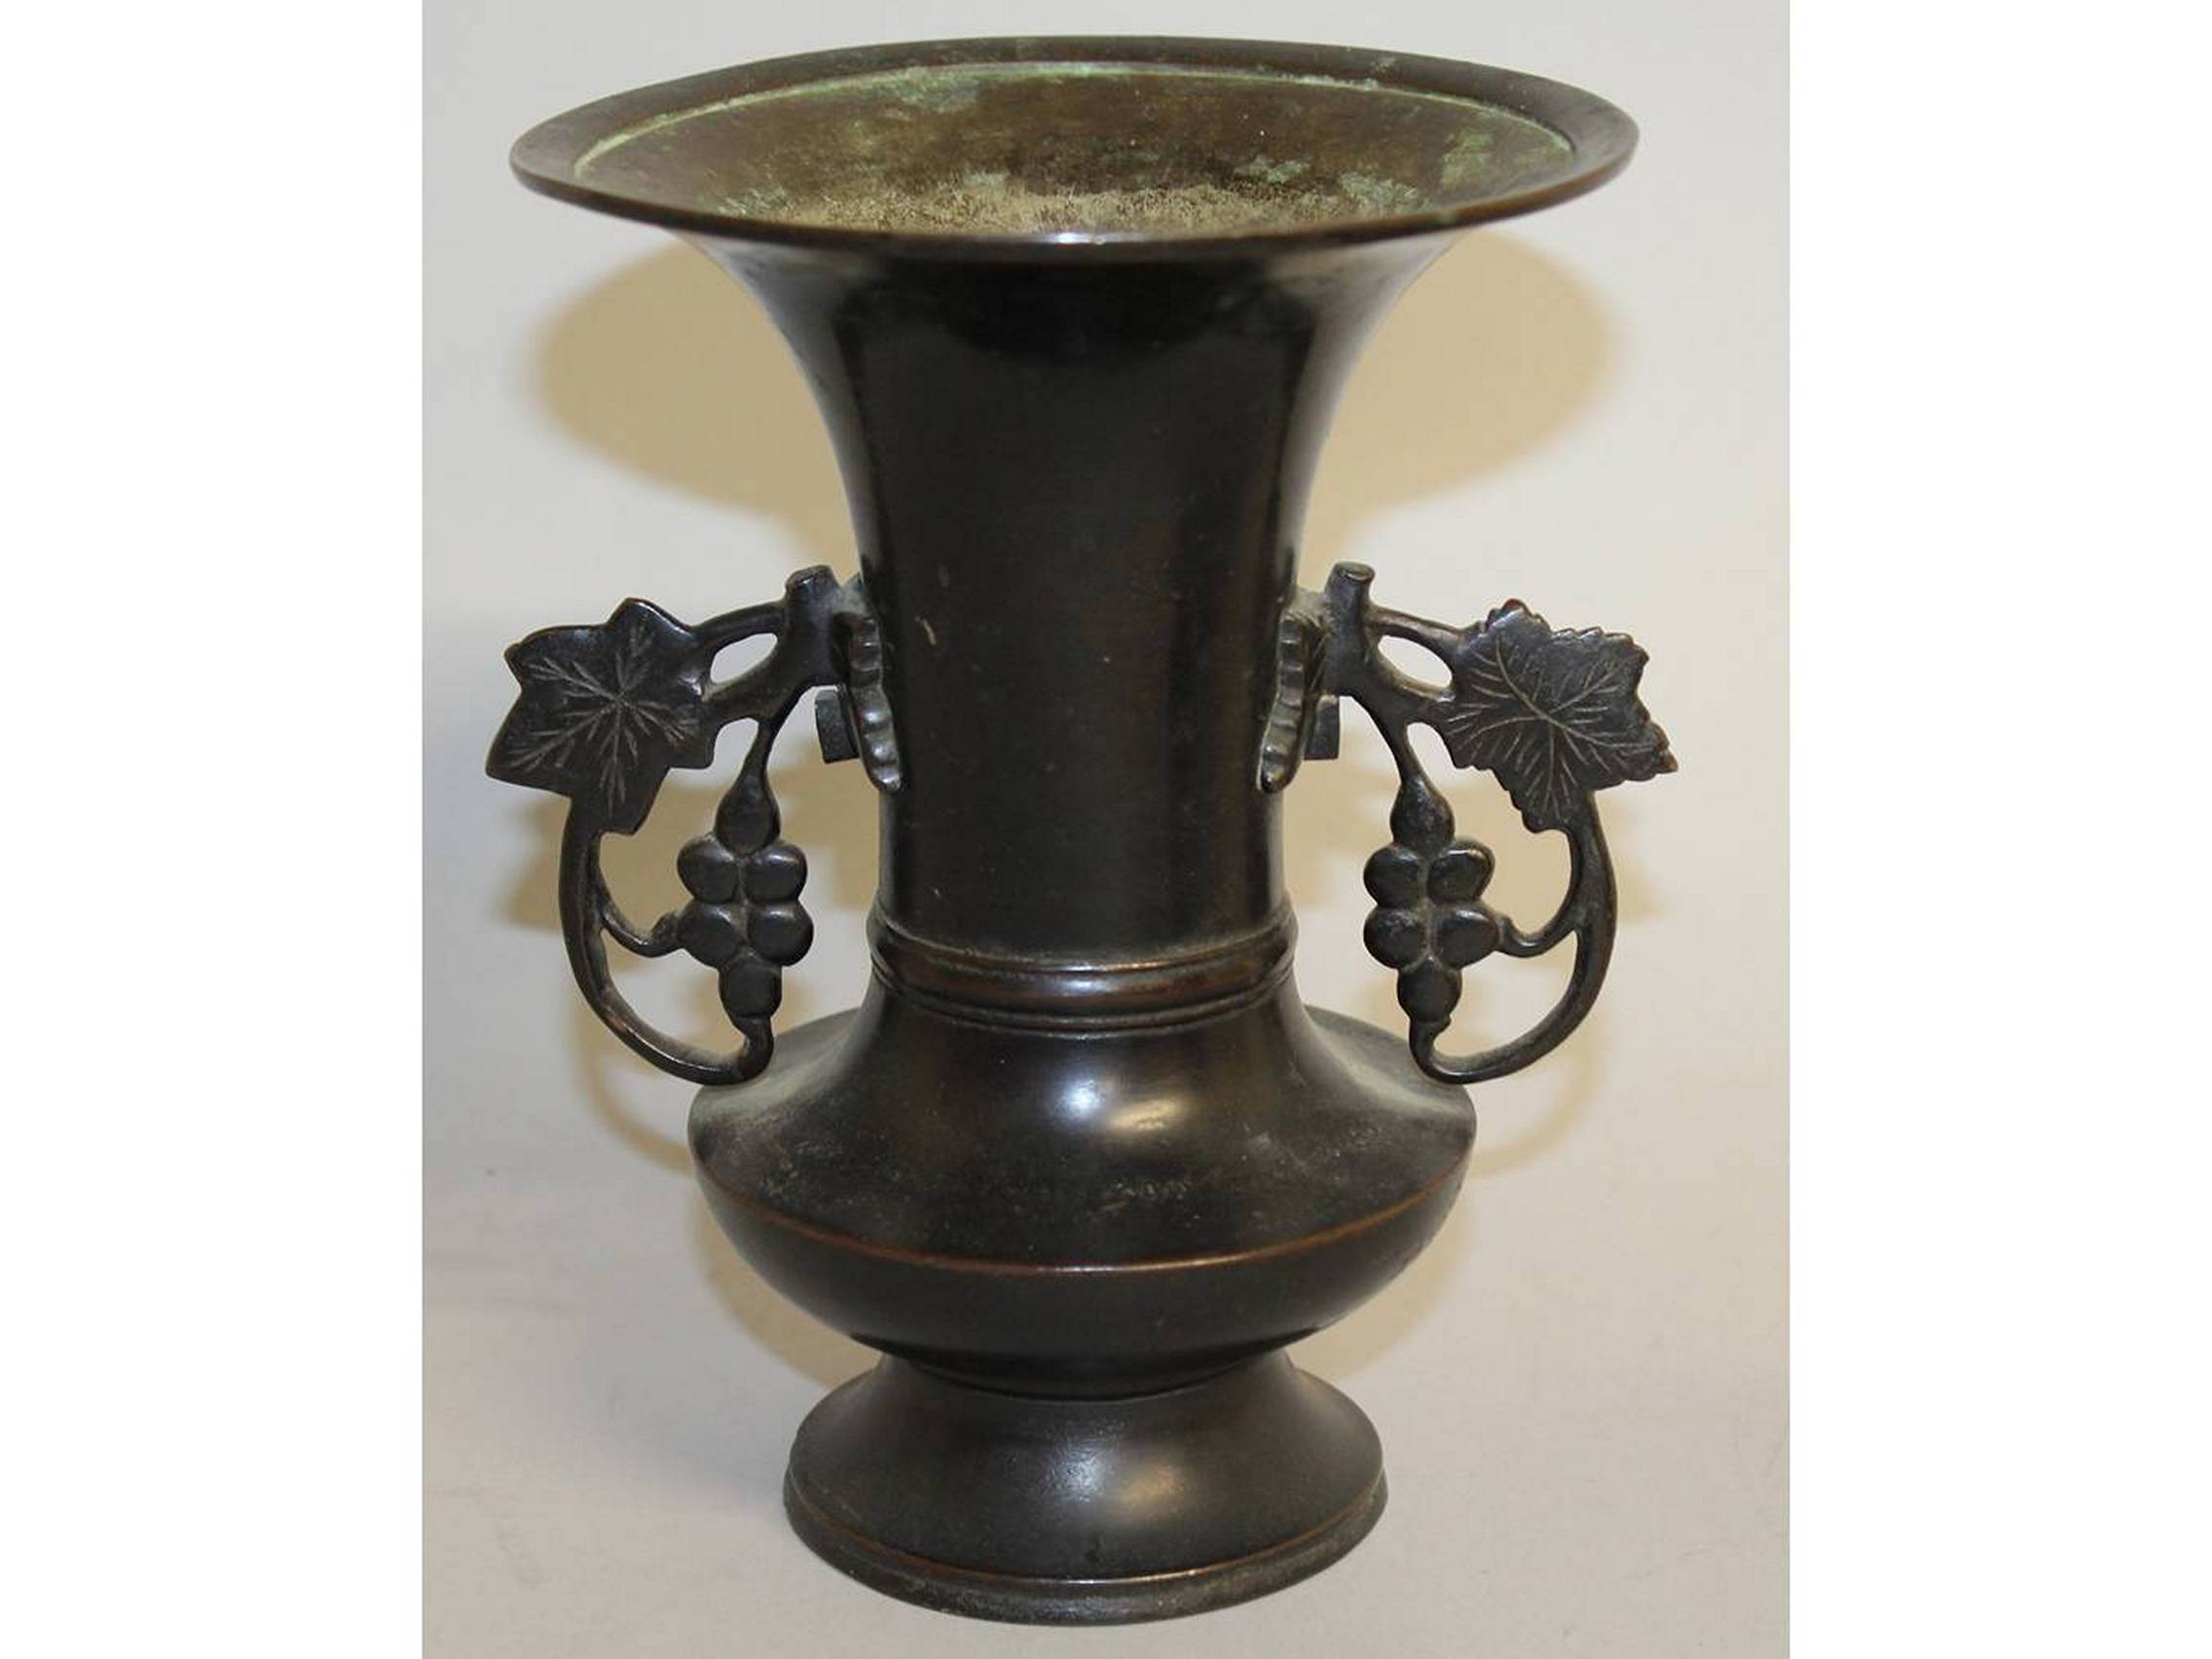 A 19TH/20TH CENTURY JAPANESE BRONZE VASE, with pierced vine handles, 6.8in high.